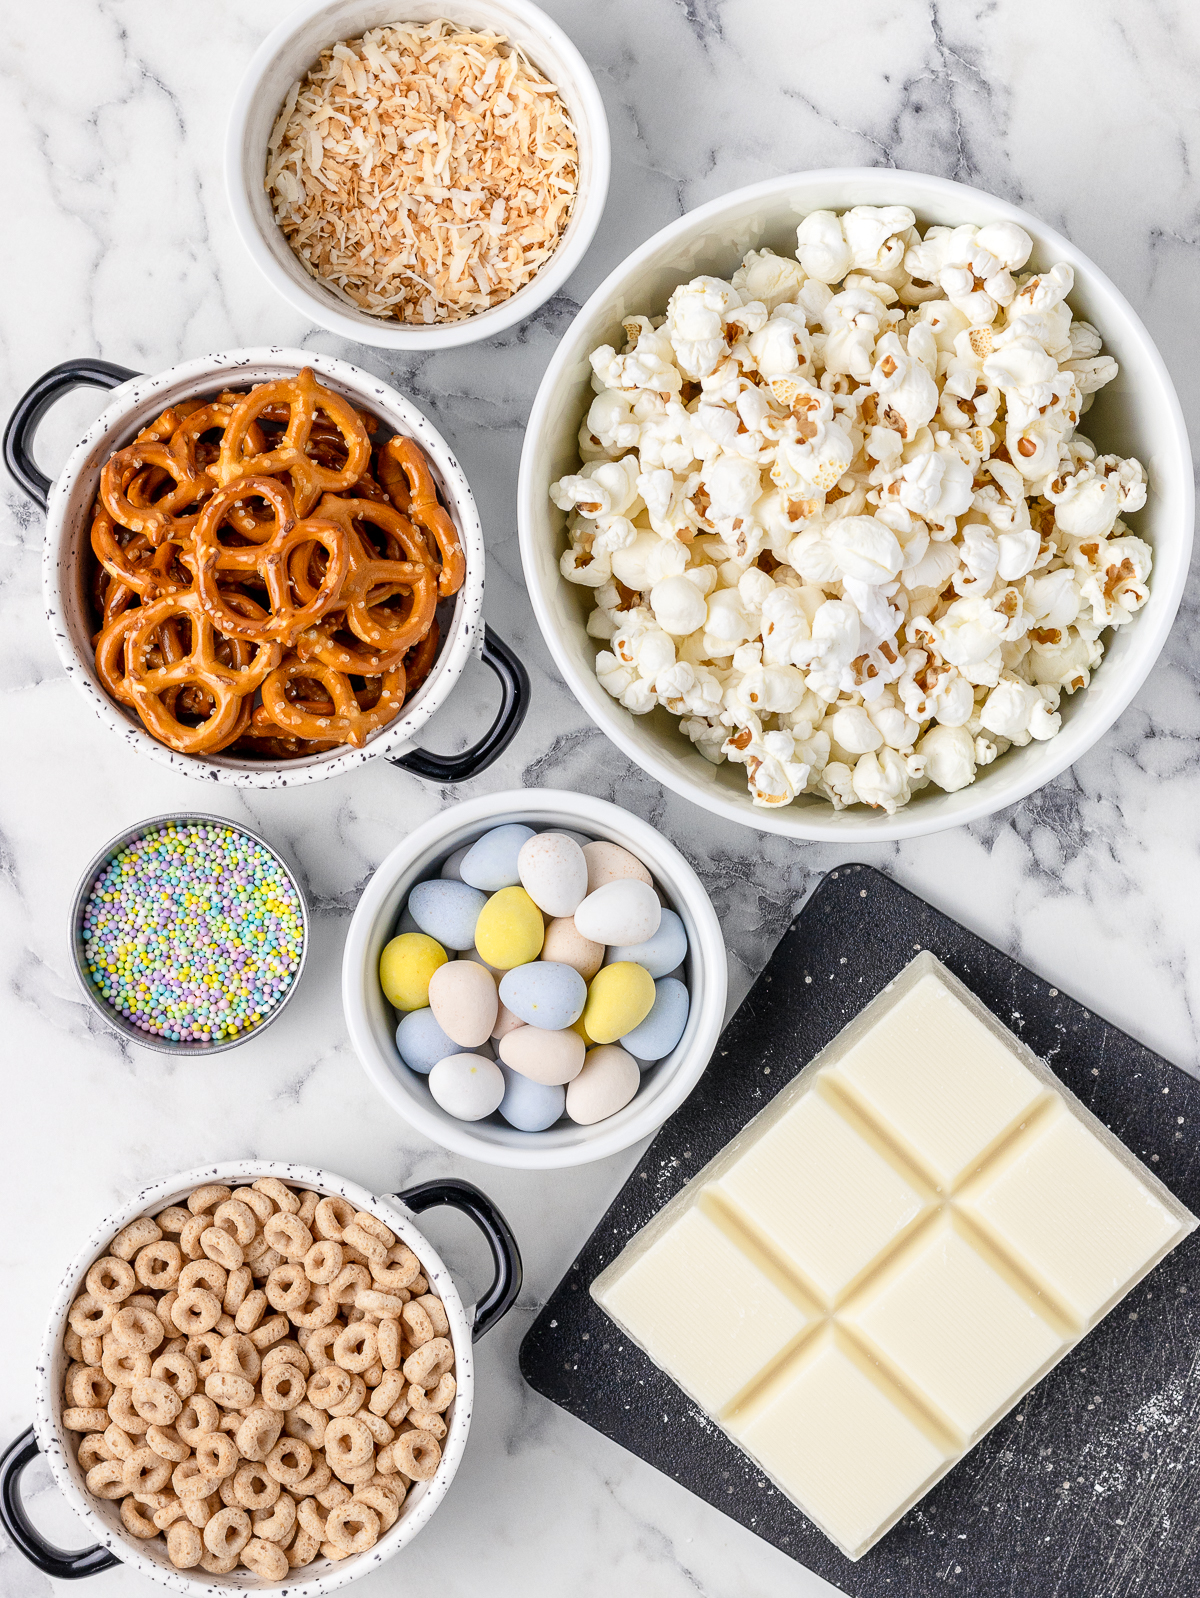 Ingredients. Plain popcorn, mini pretzels, toasted O's cereal, toasted unsweetened coconut, white chocolate or almond bark, milk chocolate eggs, and pastel Easter sprinkles.